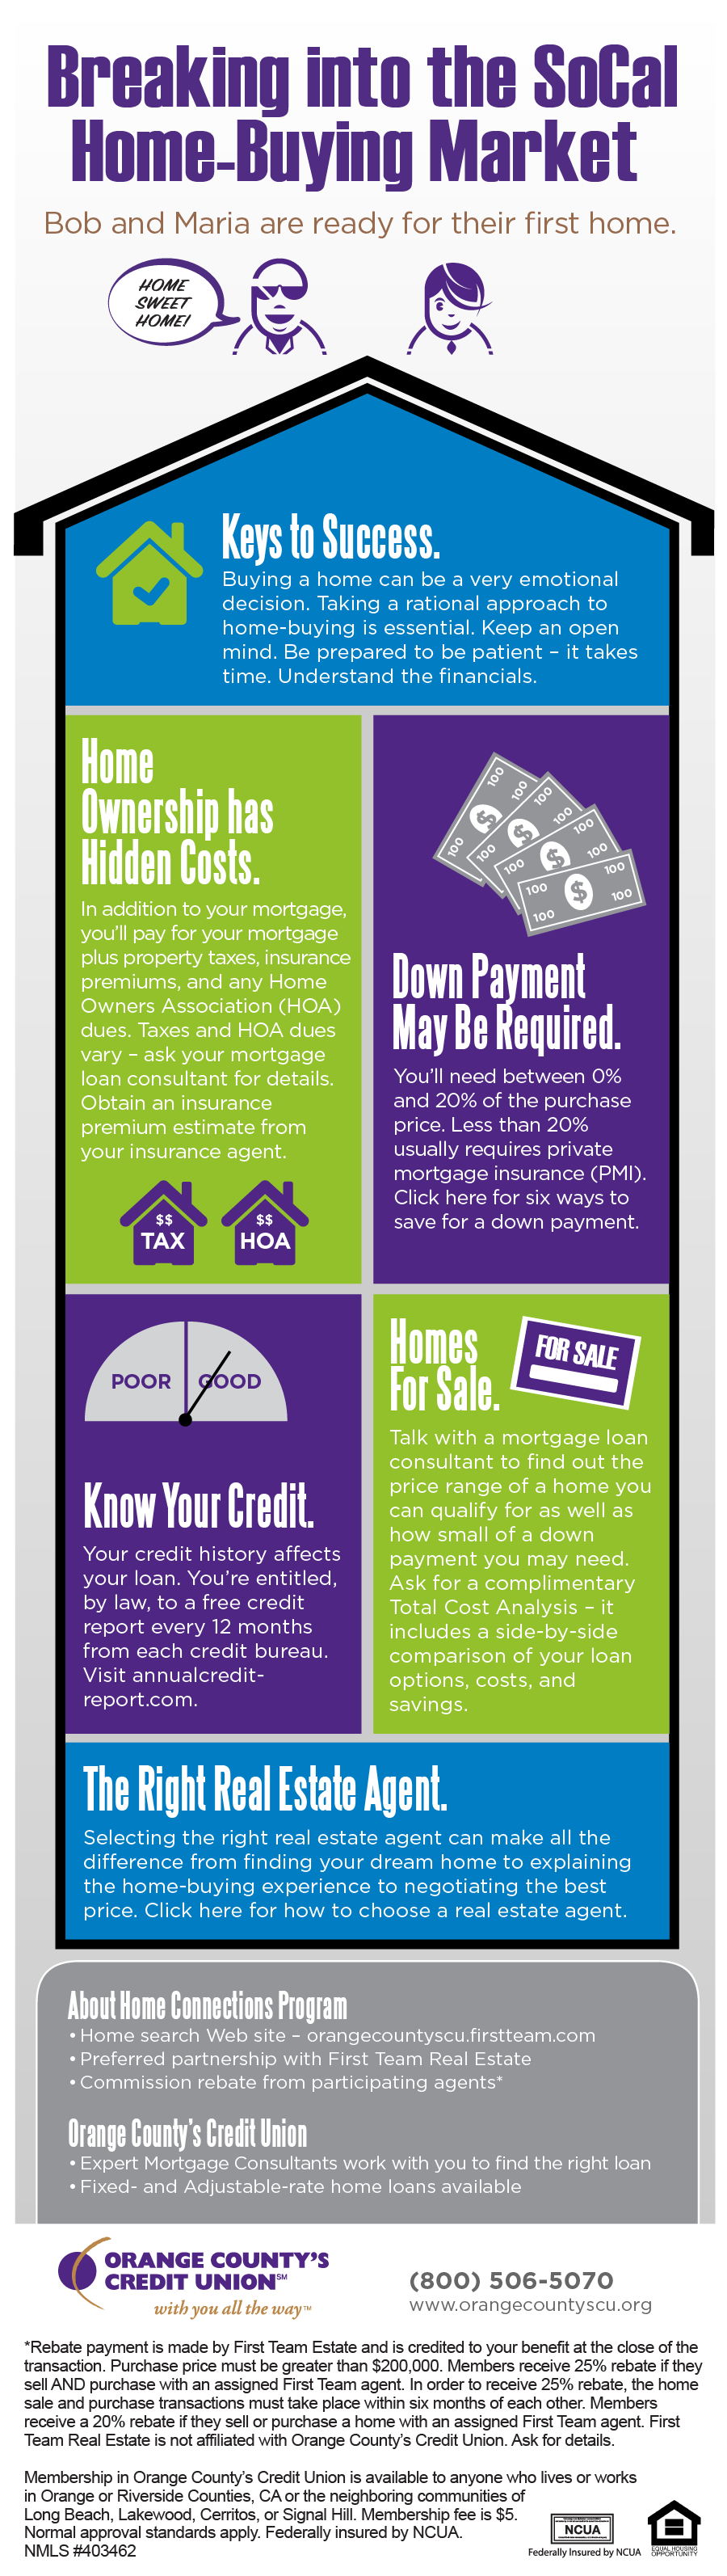 original_0517_Infographic_BuyingFirstHome_2-01.png